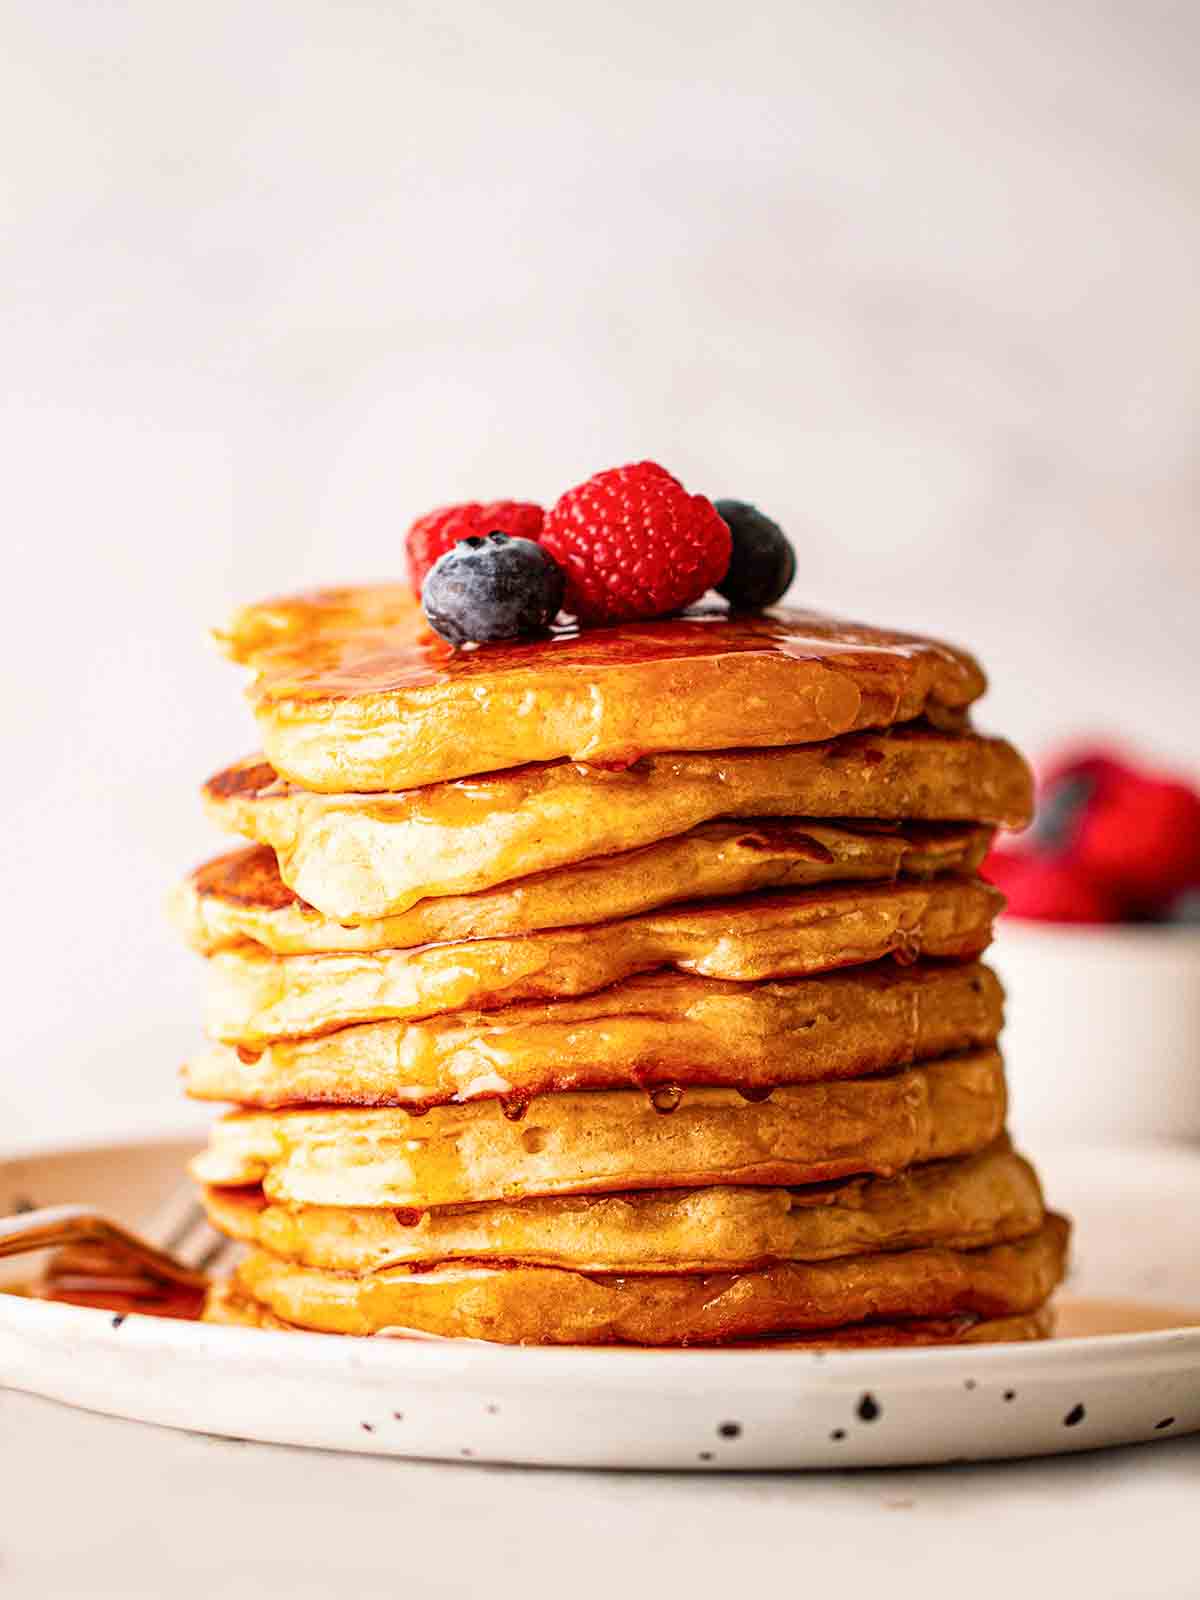 A pile of fluffy American Pancakes on a plate with blueberries and raspberries on top.